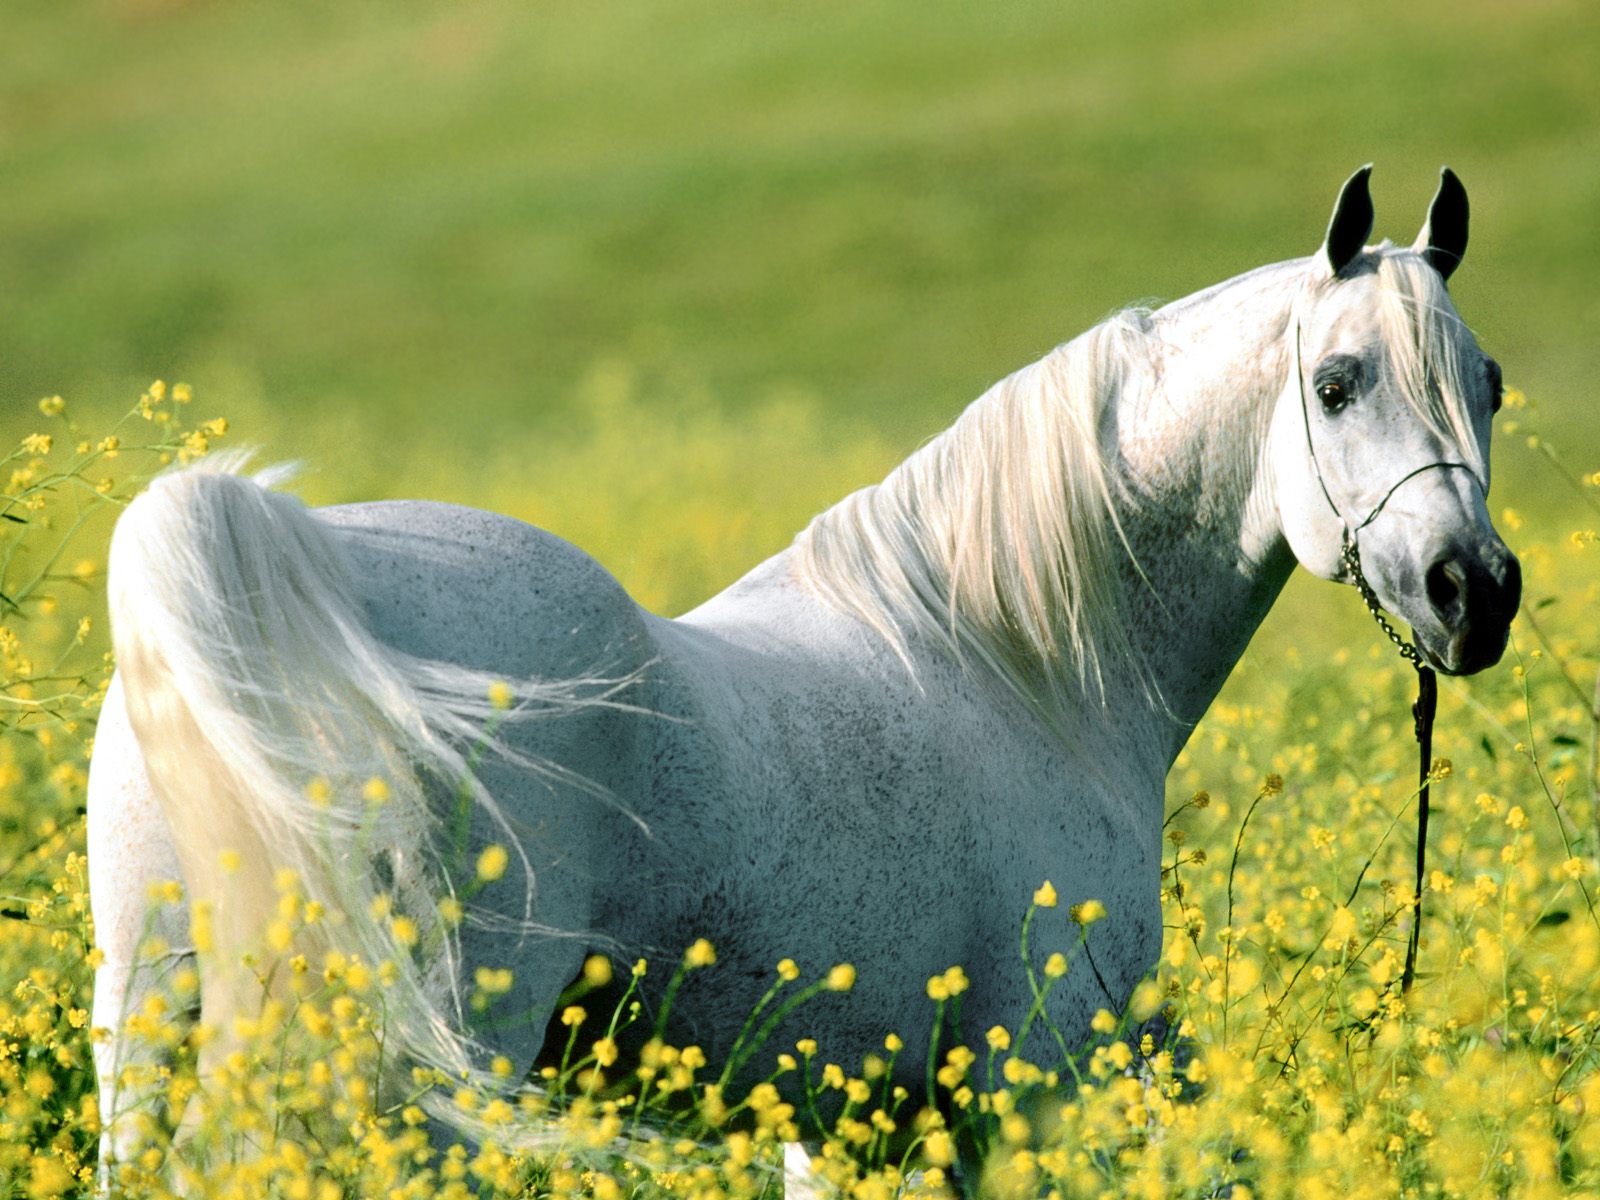 Wallpaper Of A White Horse In Field Full Yellow Flowers